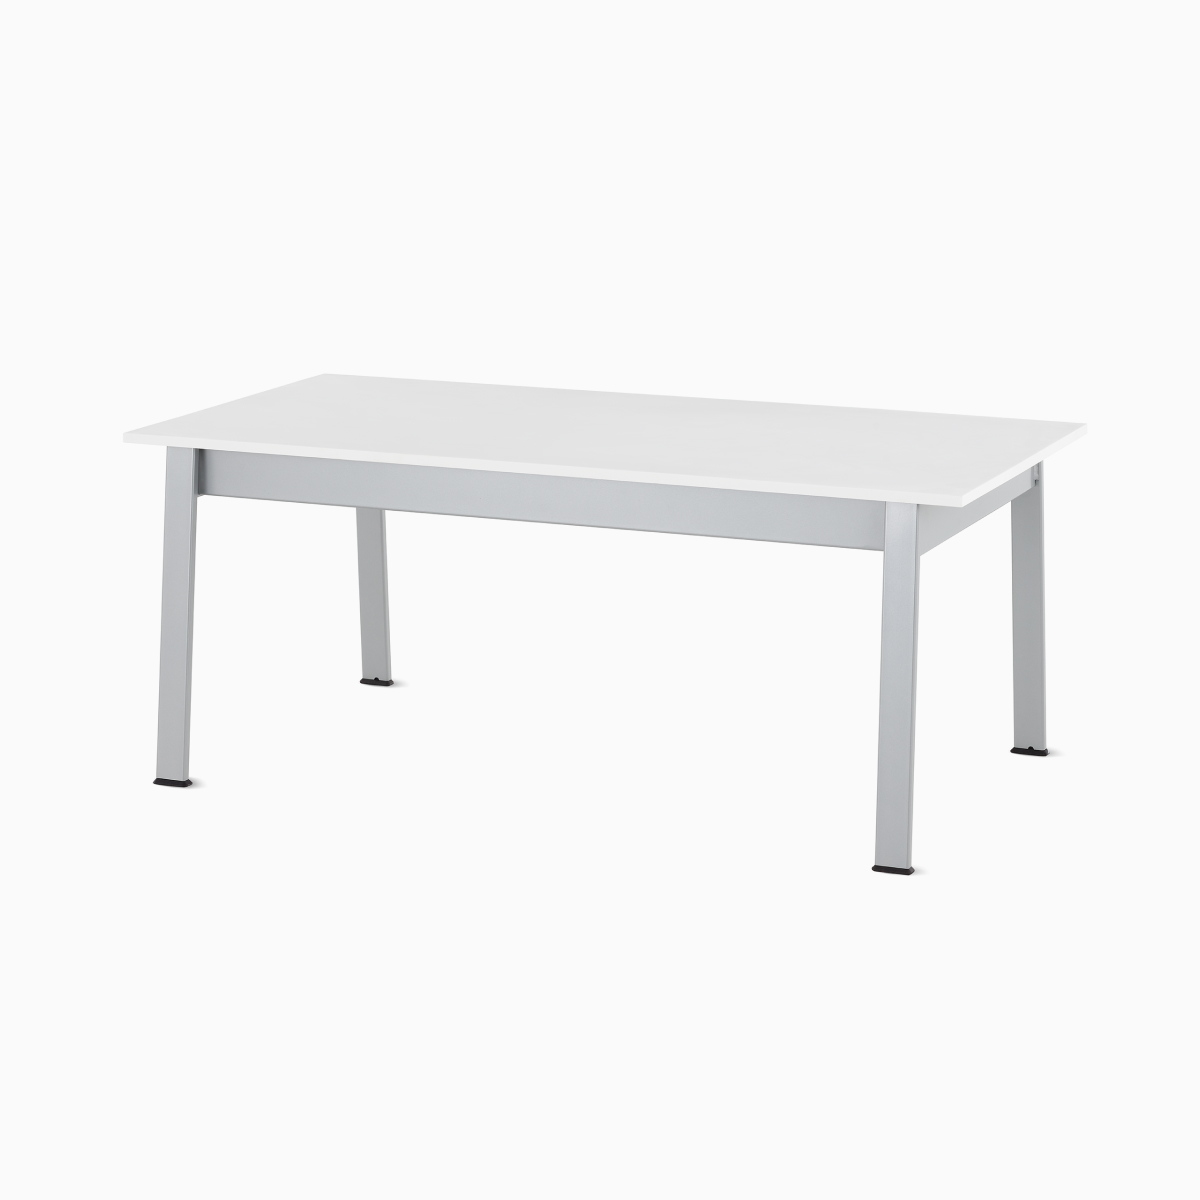 Angled view of an Easton Coffee Table with a glacier white Corian top and metallic silver legs.